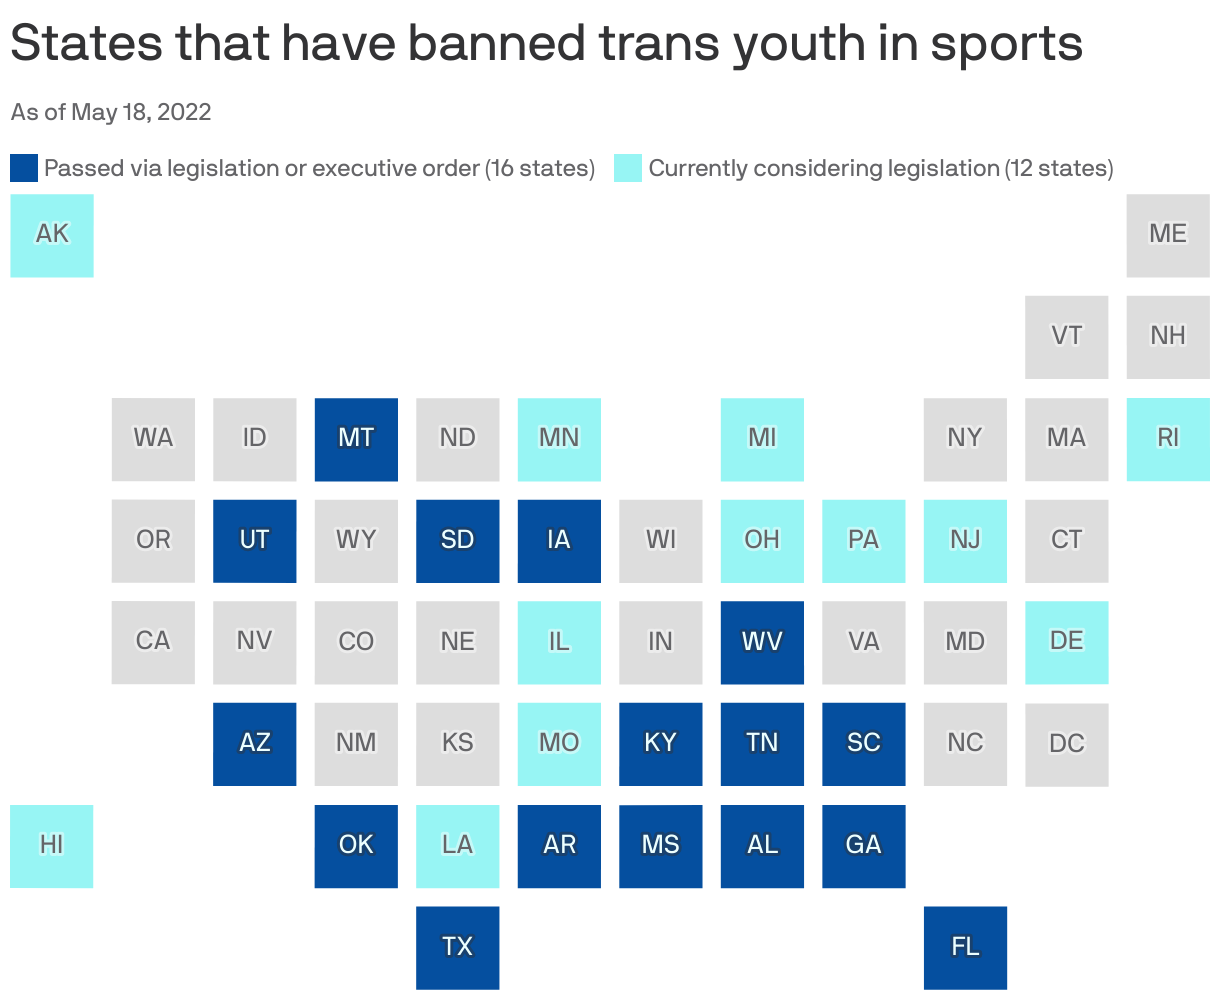 States that have banned trans youth in sports&nbsp;